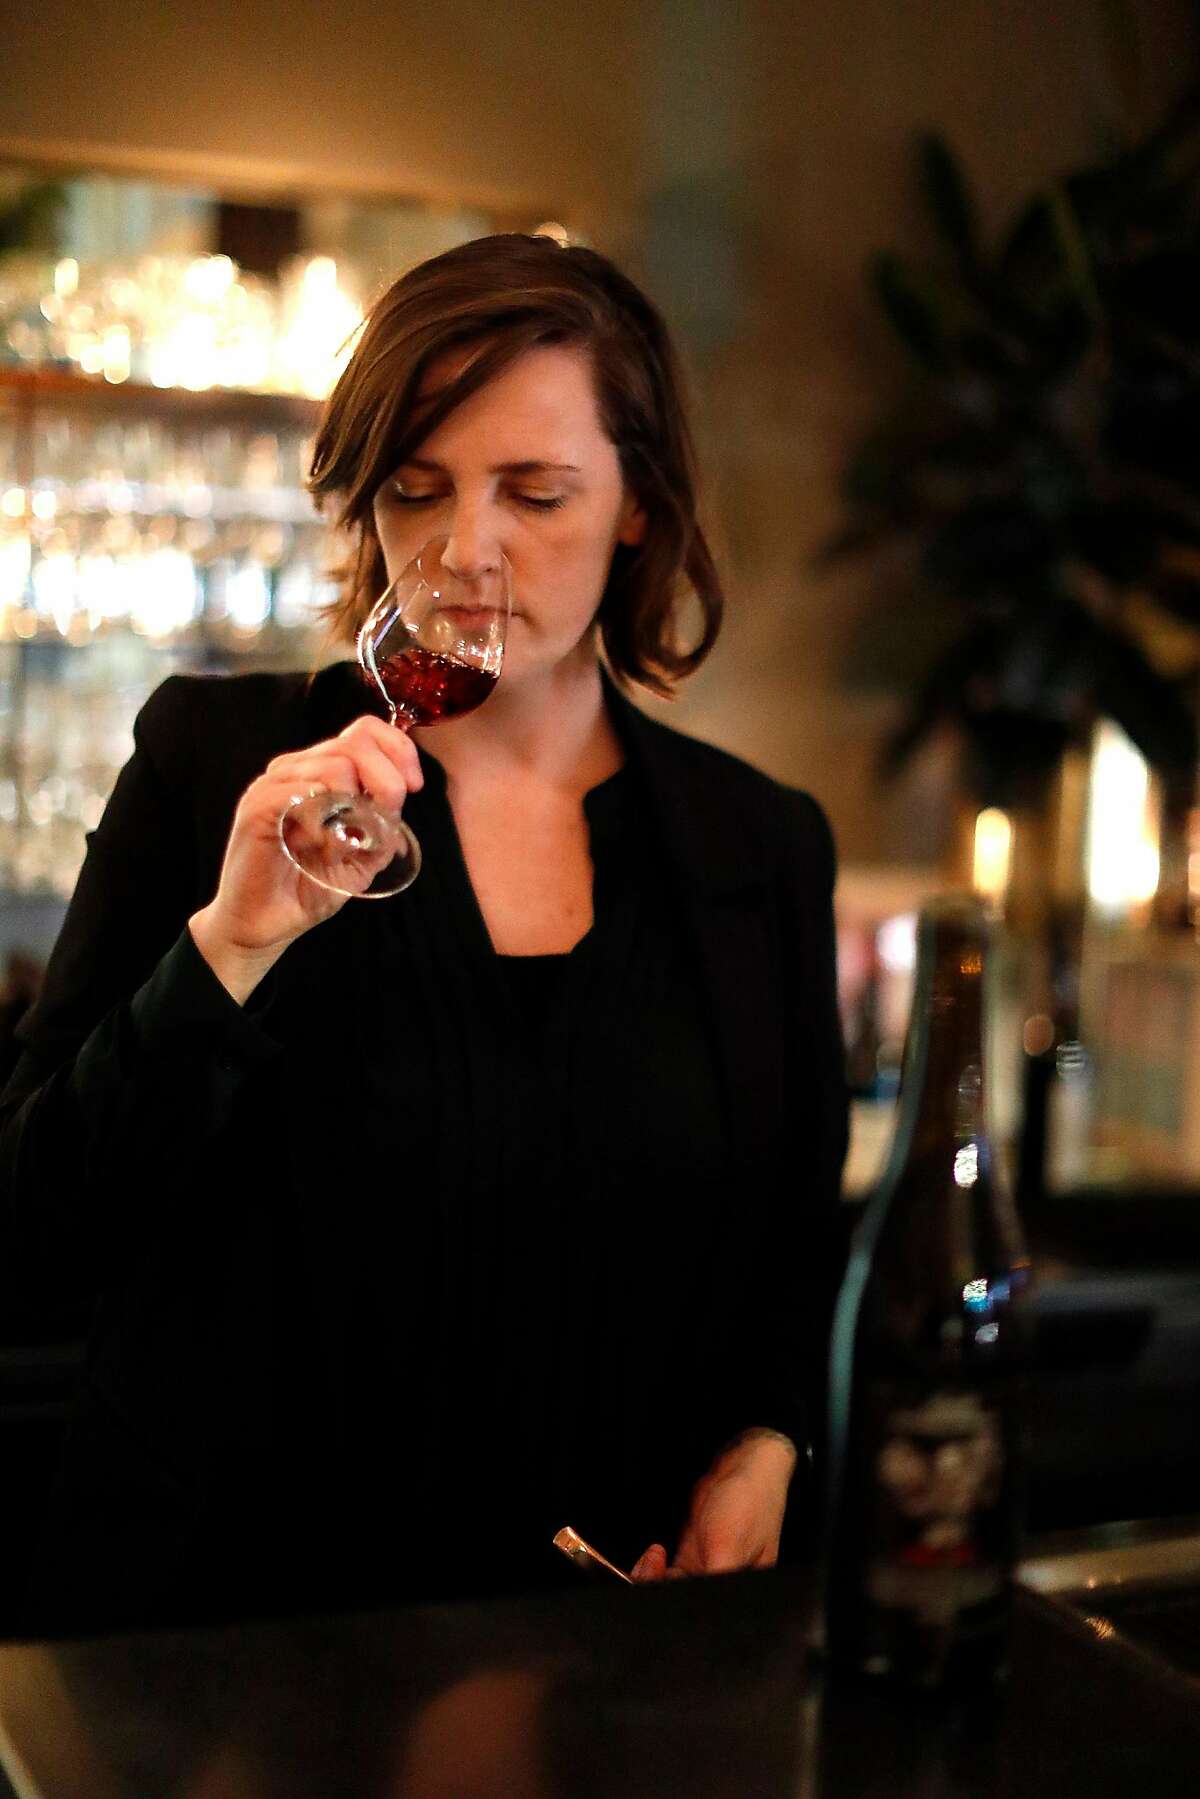 Louisa Smith, Lord Stanley wine director, checks the aroma of a glass of wine at the restaurant in San Francisco, Calif., on Wednesday, February 20, 2019.